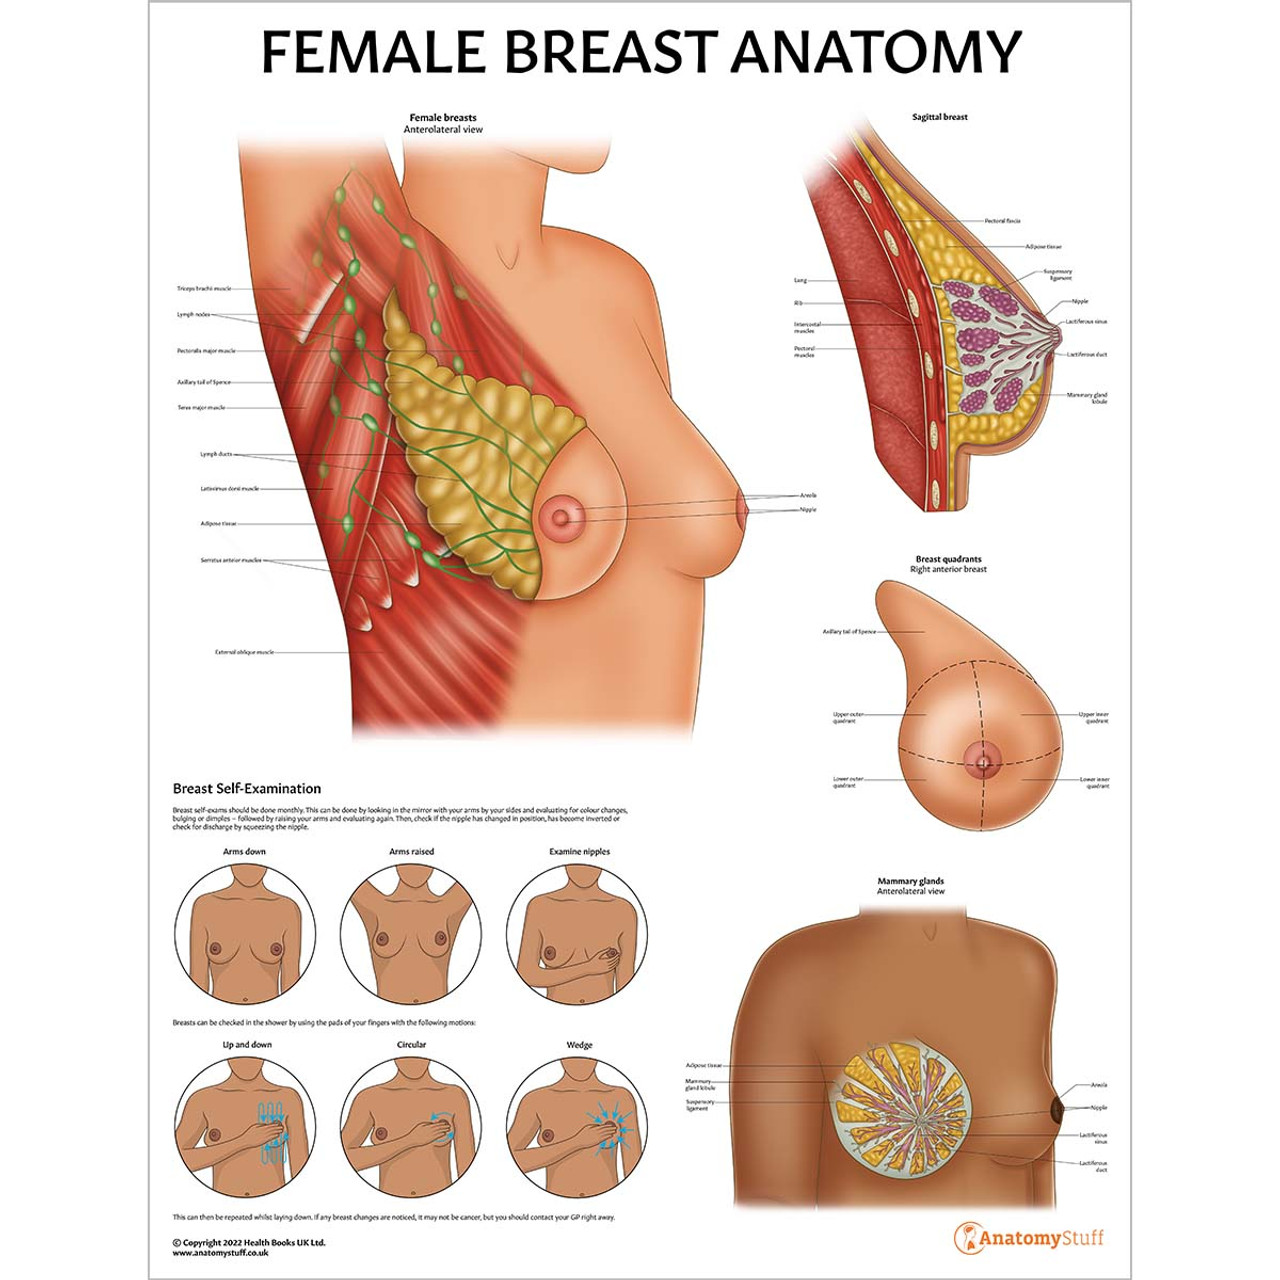 Breast Anatomy: Overview, Vascular Anatomy and Innervation of the